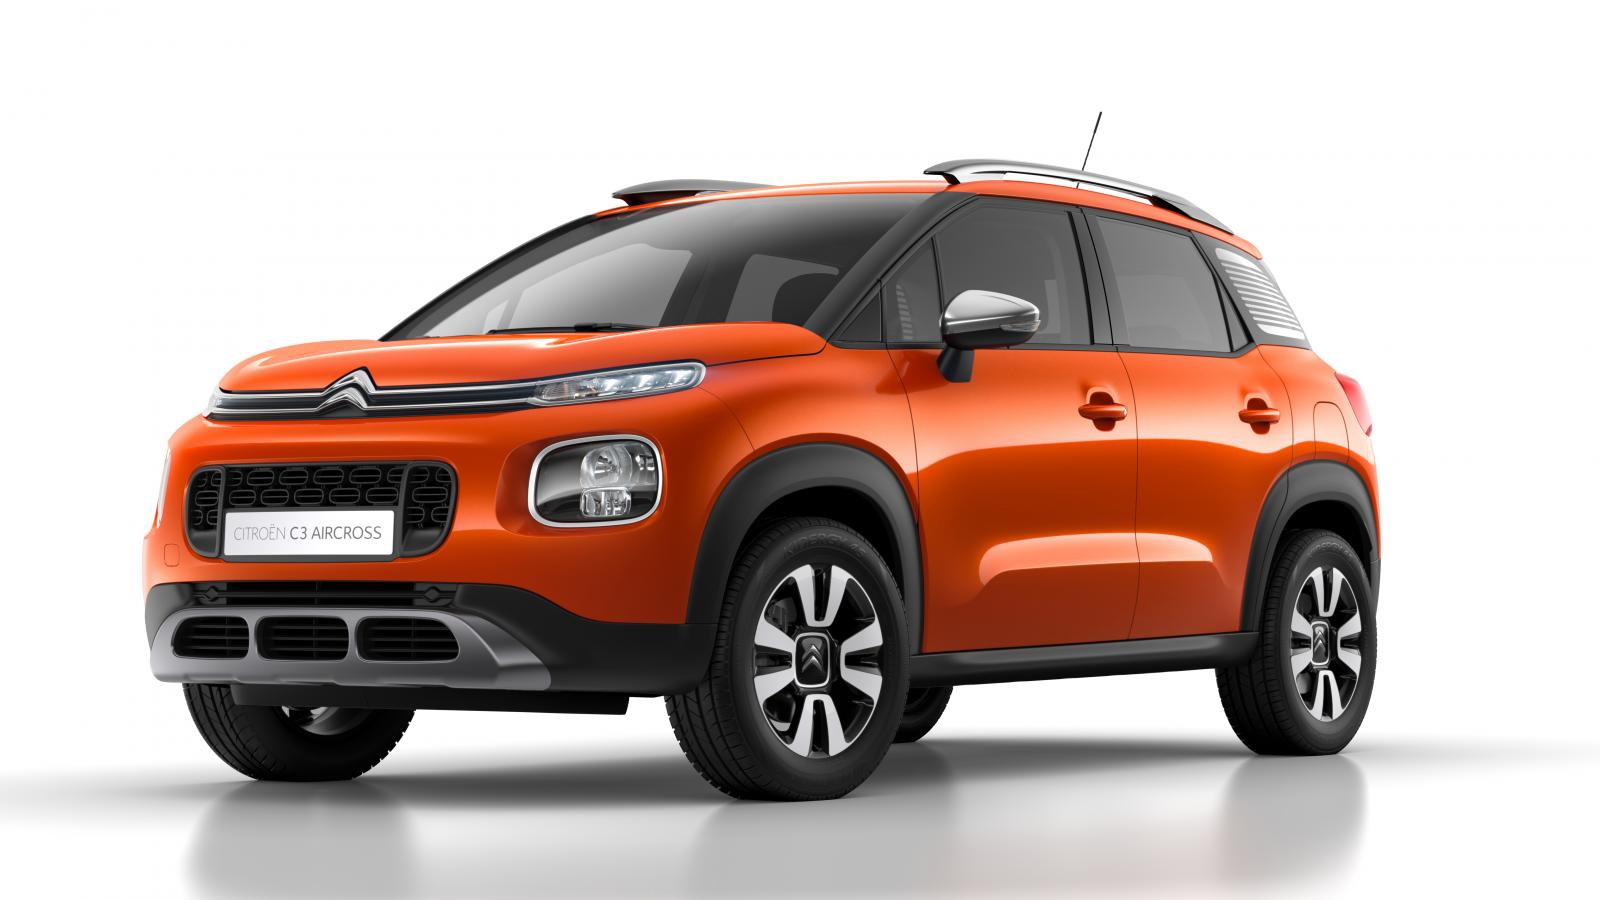 C3 Aircross Compact SUV- Spicy Orange